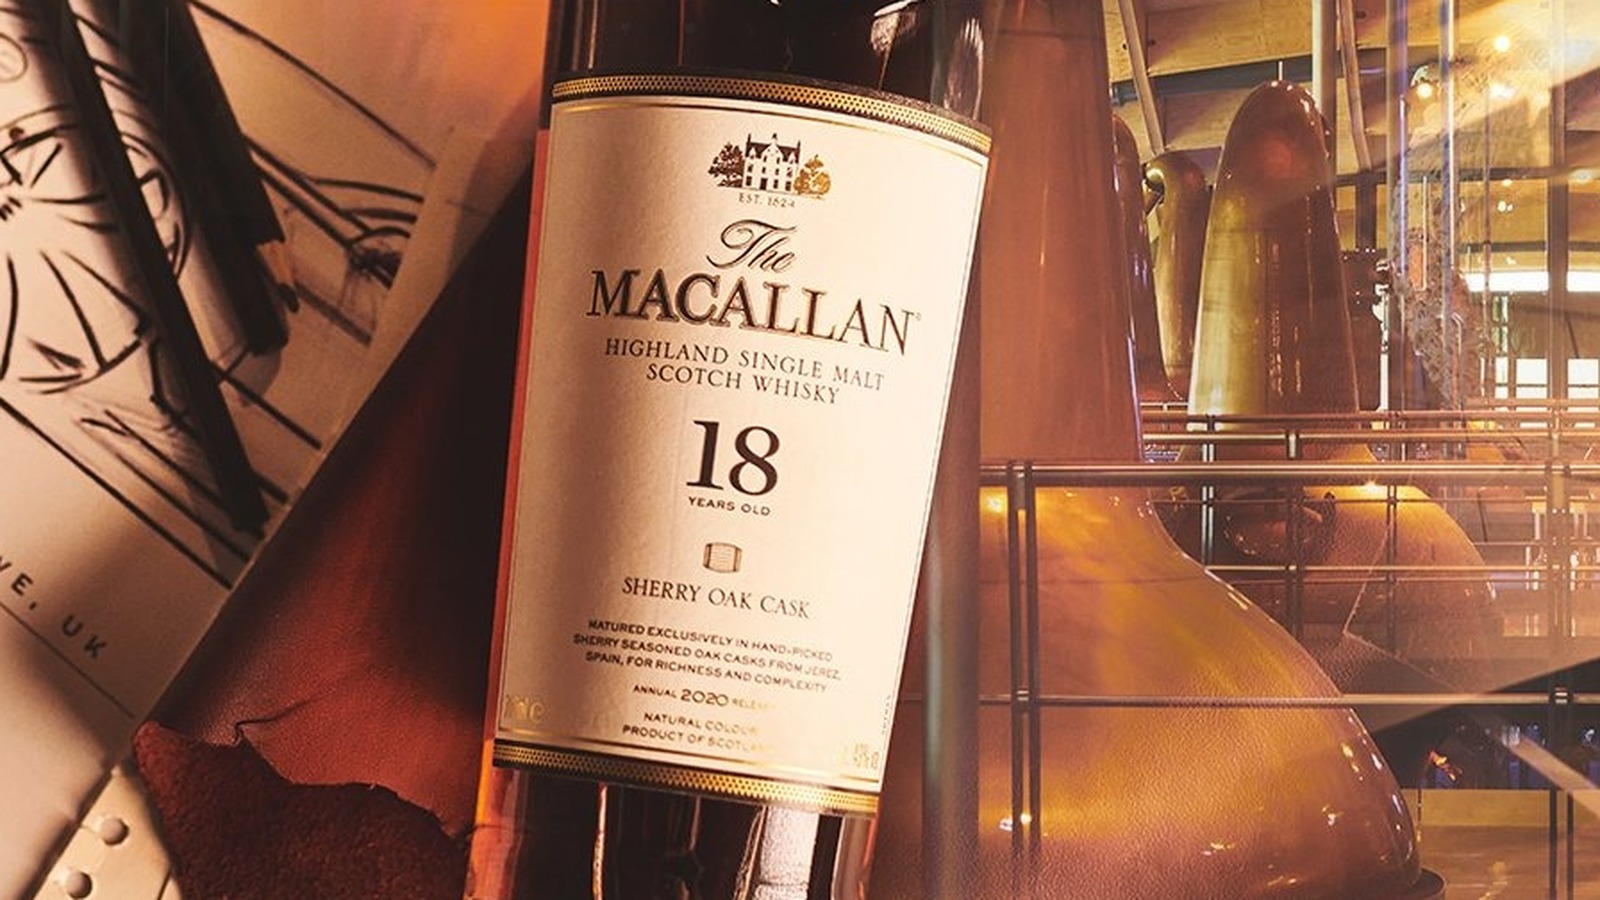 The Macallan 18 Year Old Sherry Oak Scotch Whisky